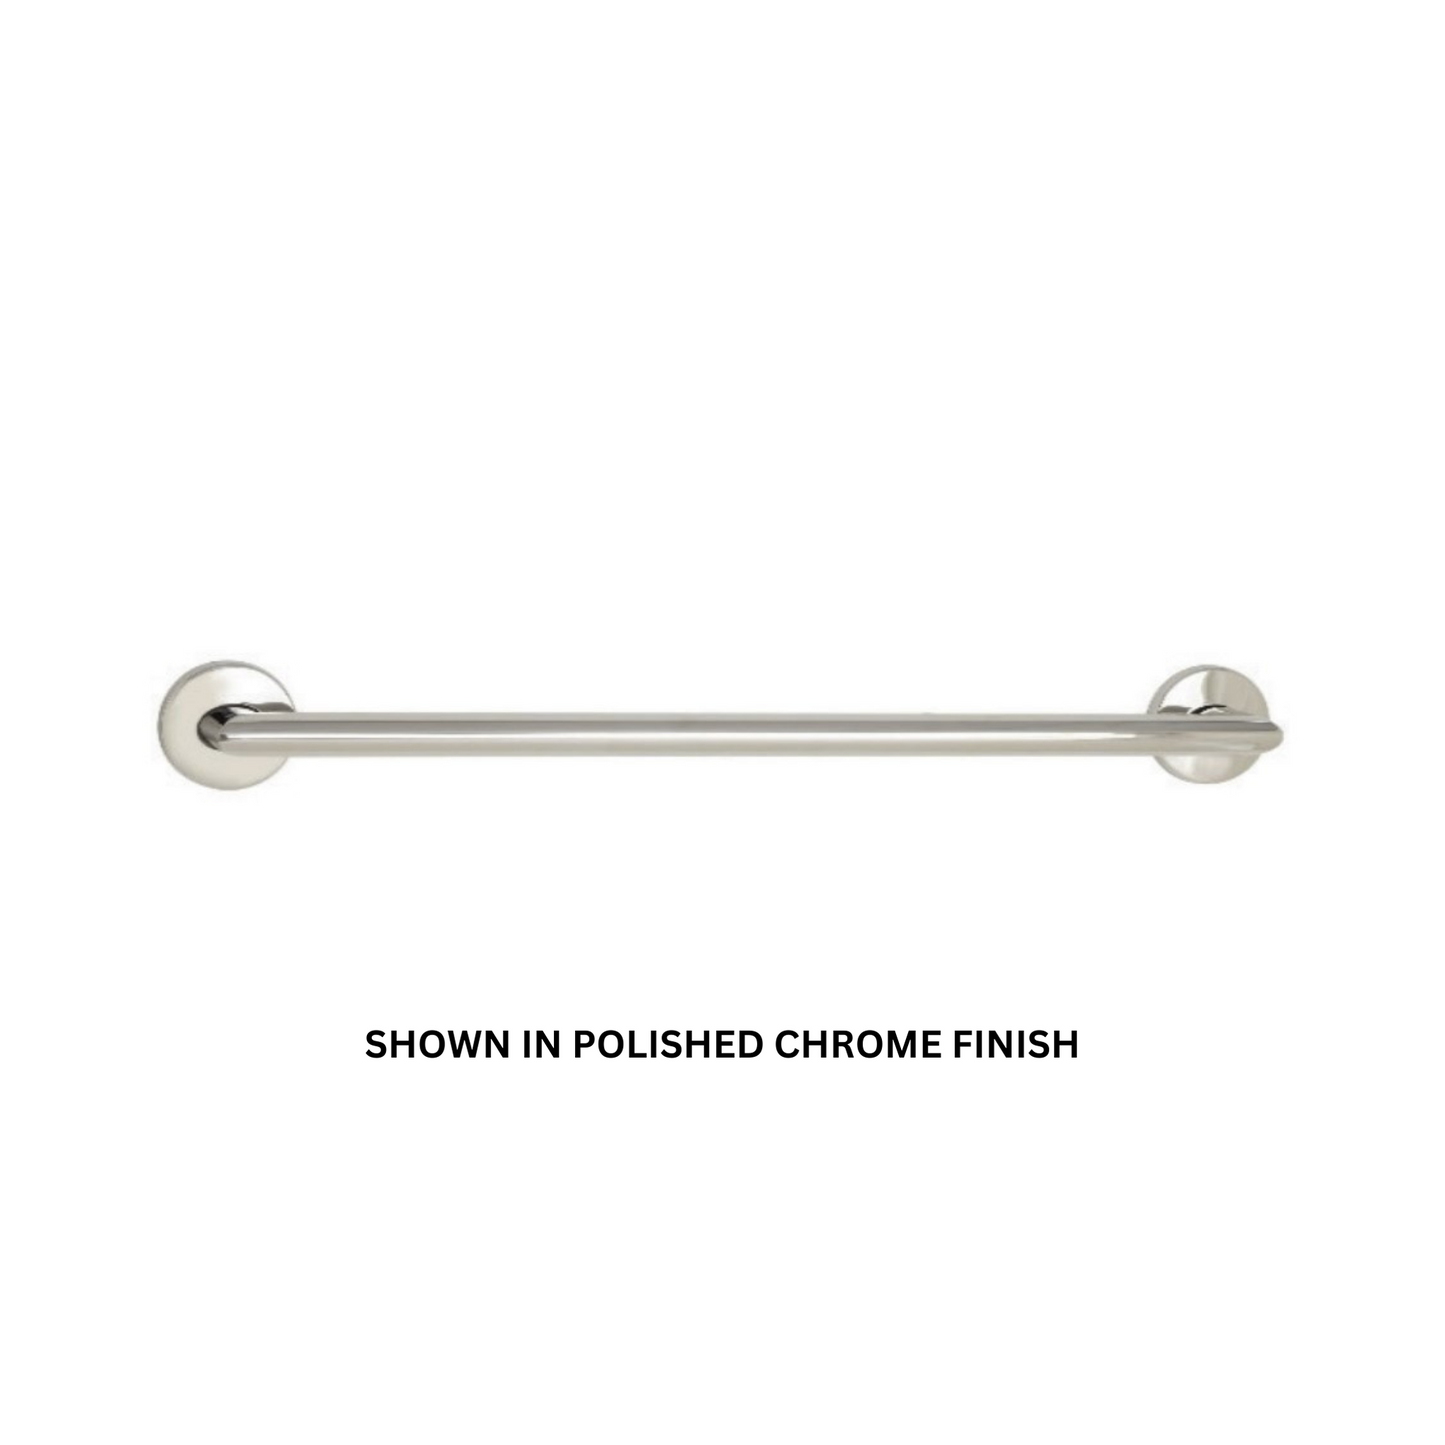 Seachrome Coronado 18" Almond Powder Coat 1.5" Concealed Flanges Oval Grab Bar With Mitered Corners